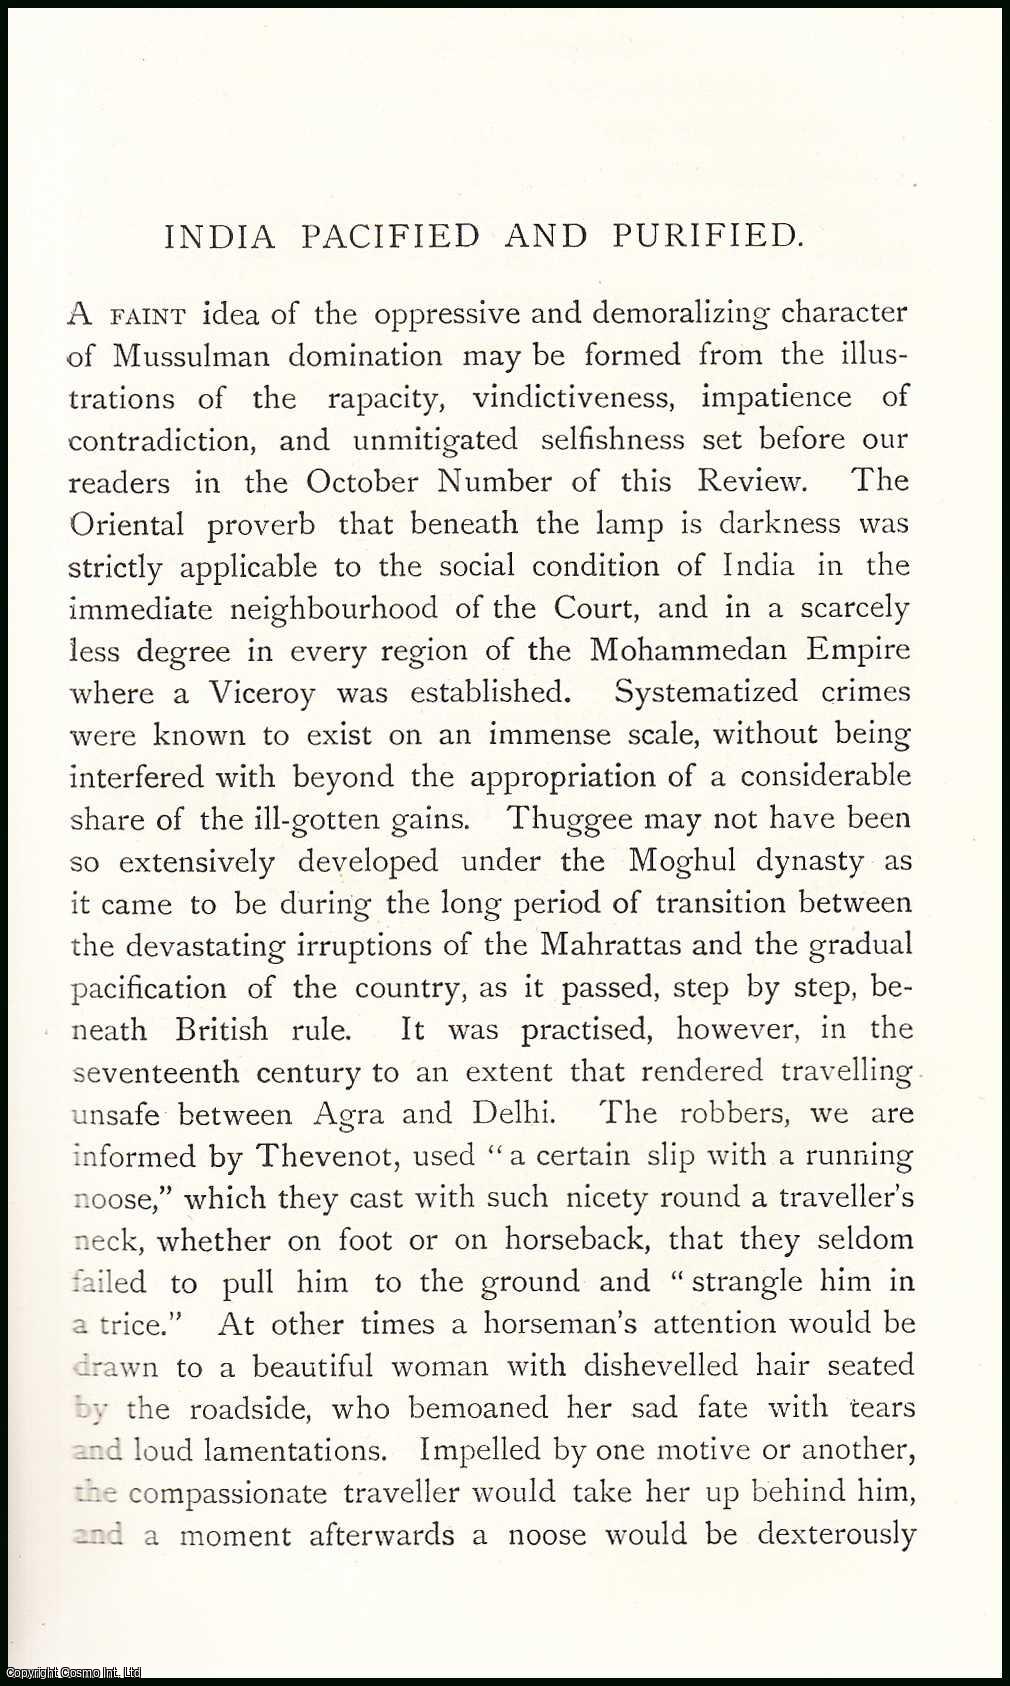 James Hutton - India Pacified & Purified. An uncommon original article from The Asiatic Quarterly Review, 1887.